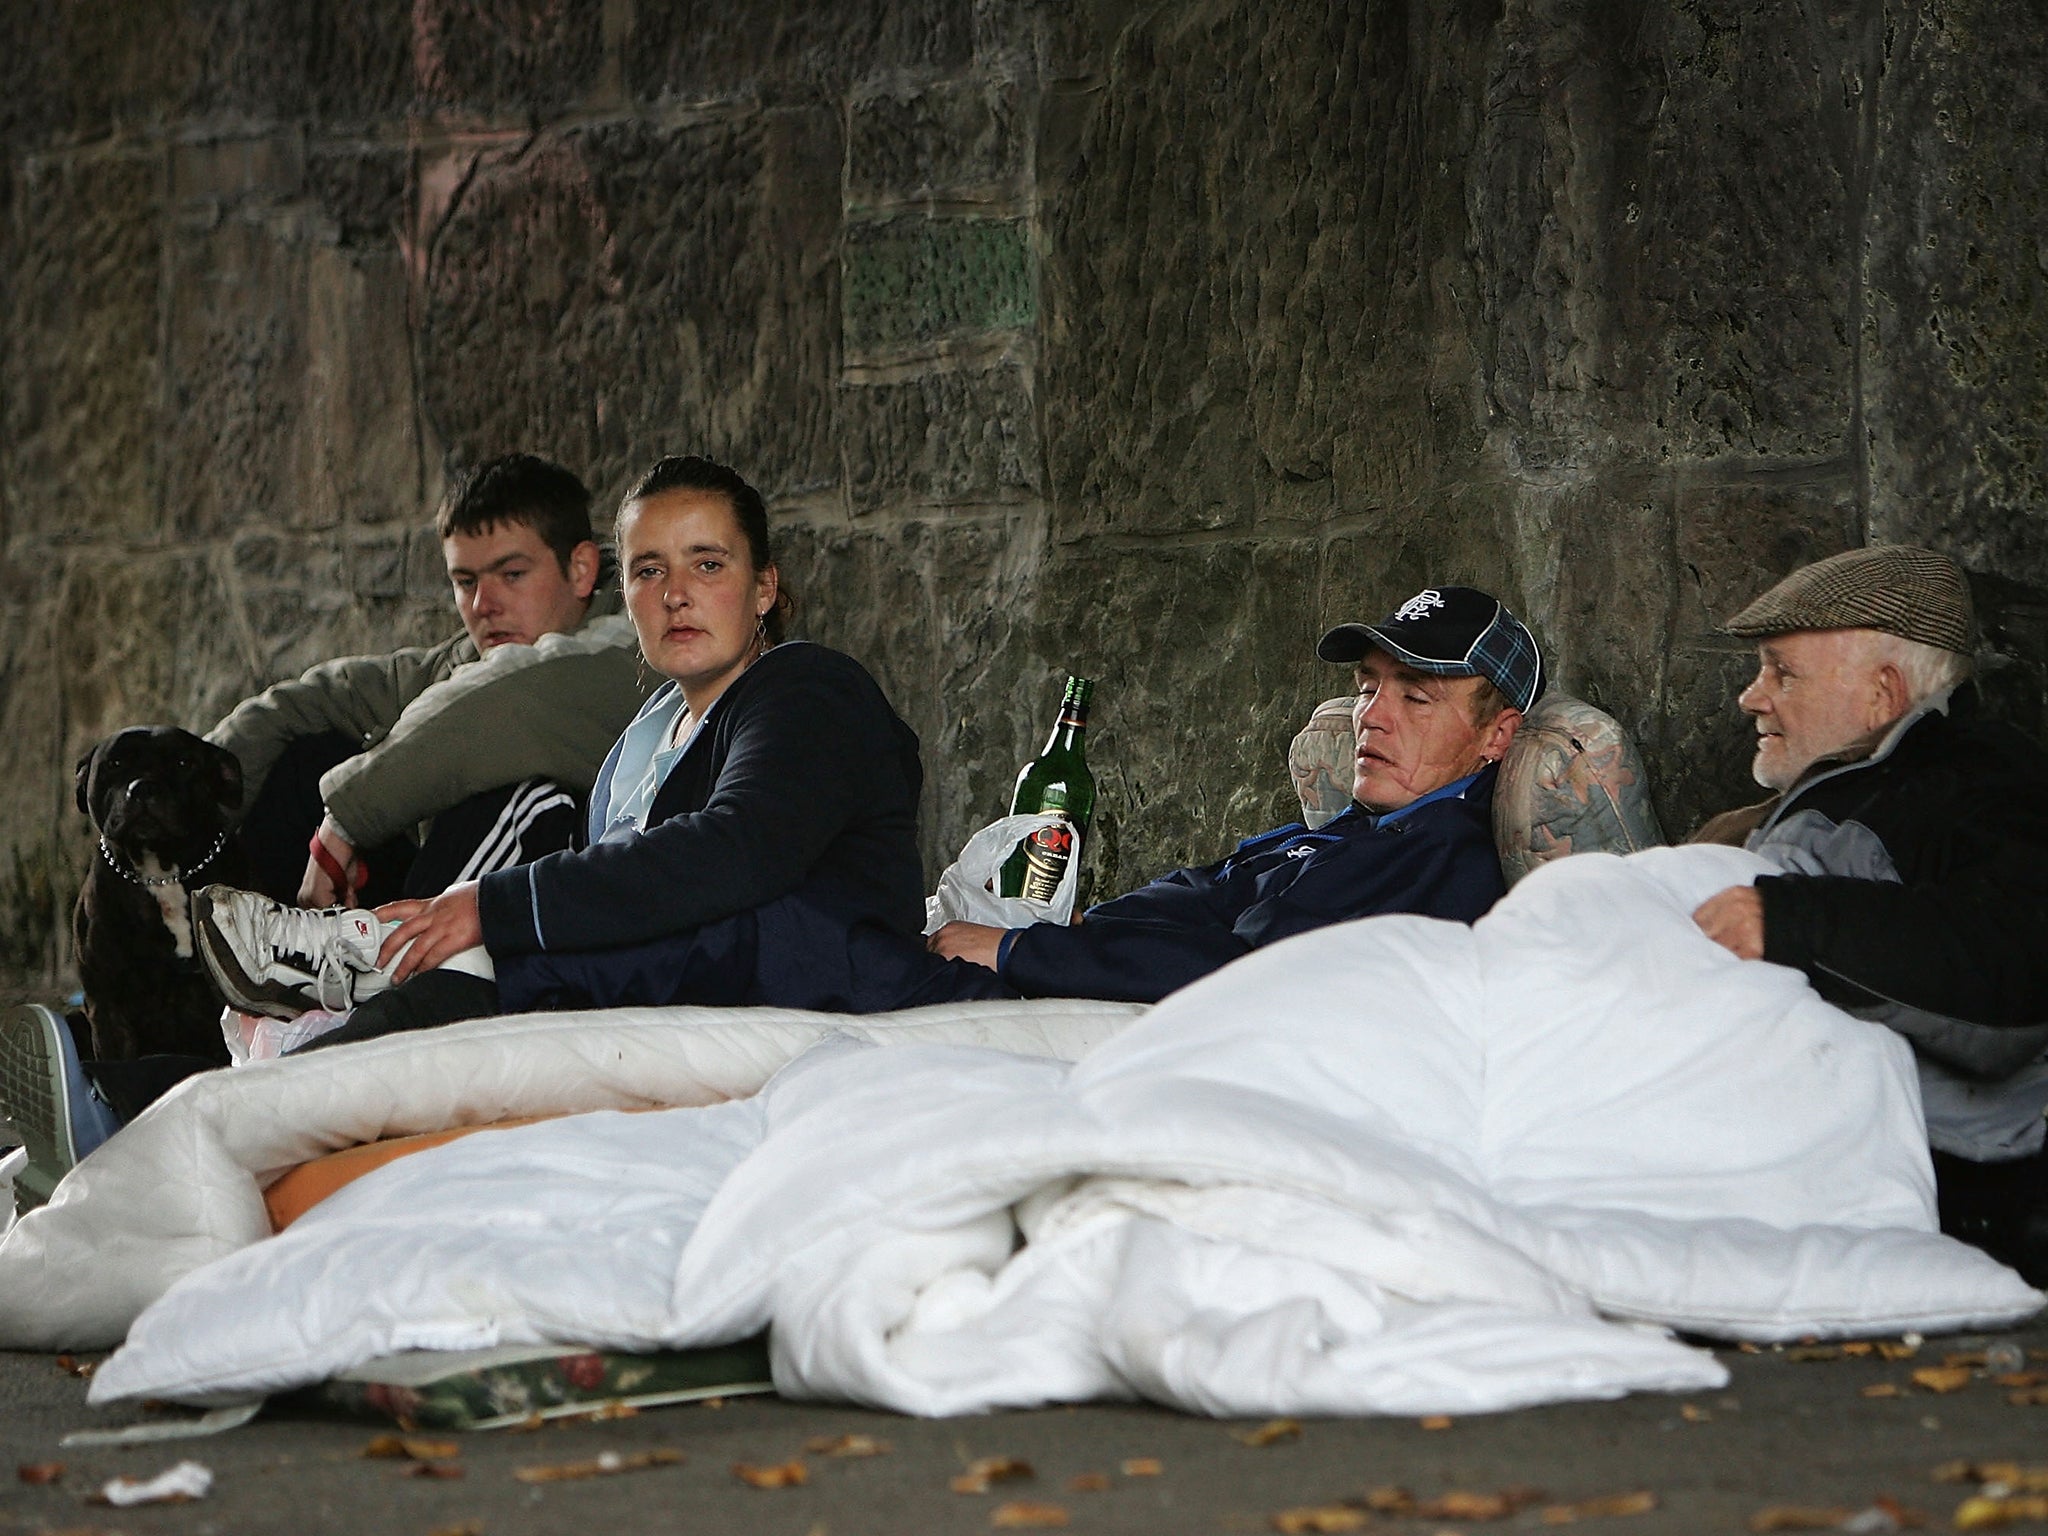 Homeless people sit under a bridge on the banks of the River Clyde in Glasgow. Homeless charity Shelter is one of the organisations calling for the biggest house building programme in Scotland since the 1970s